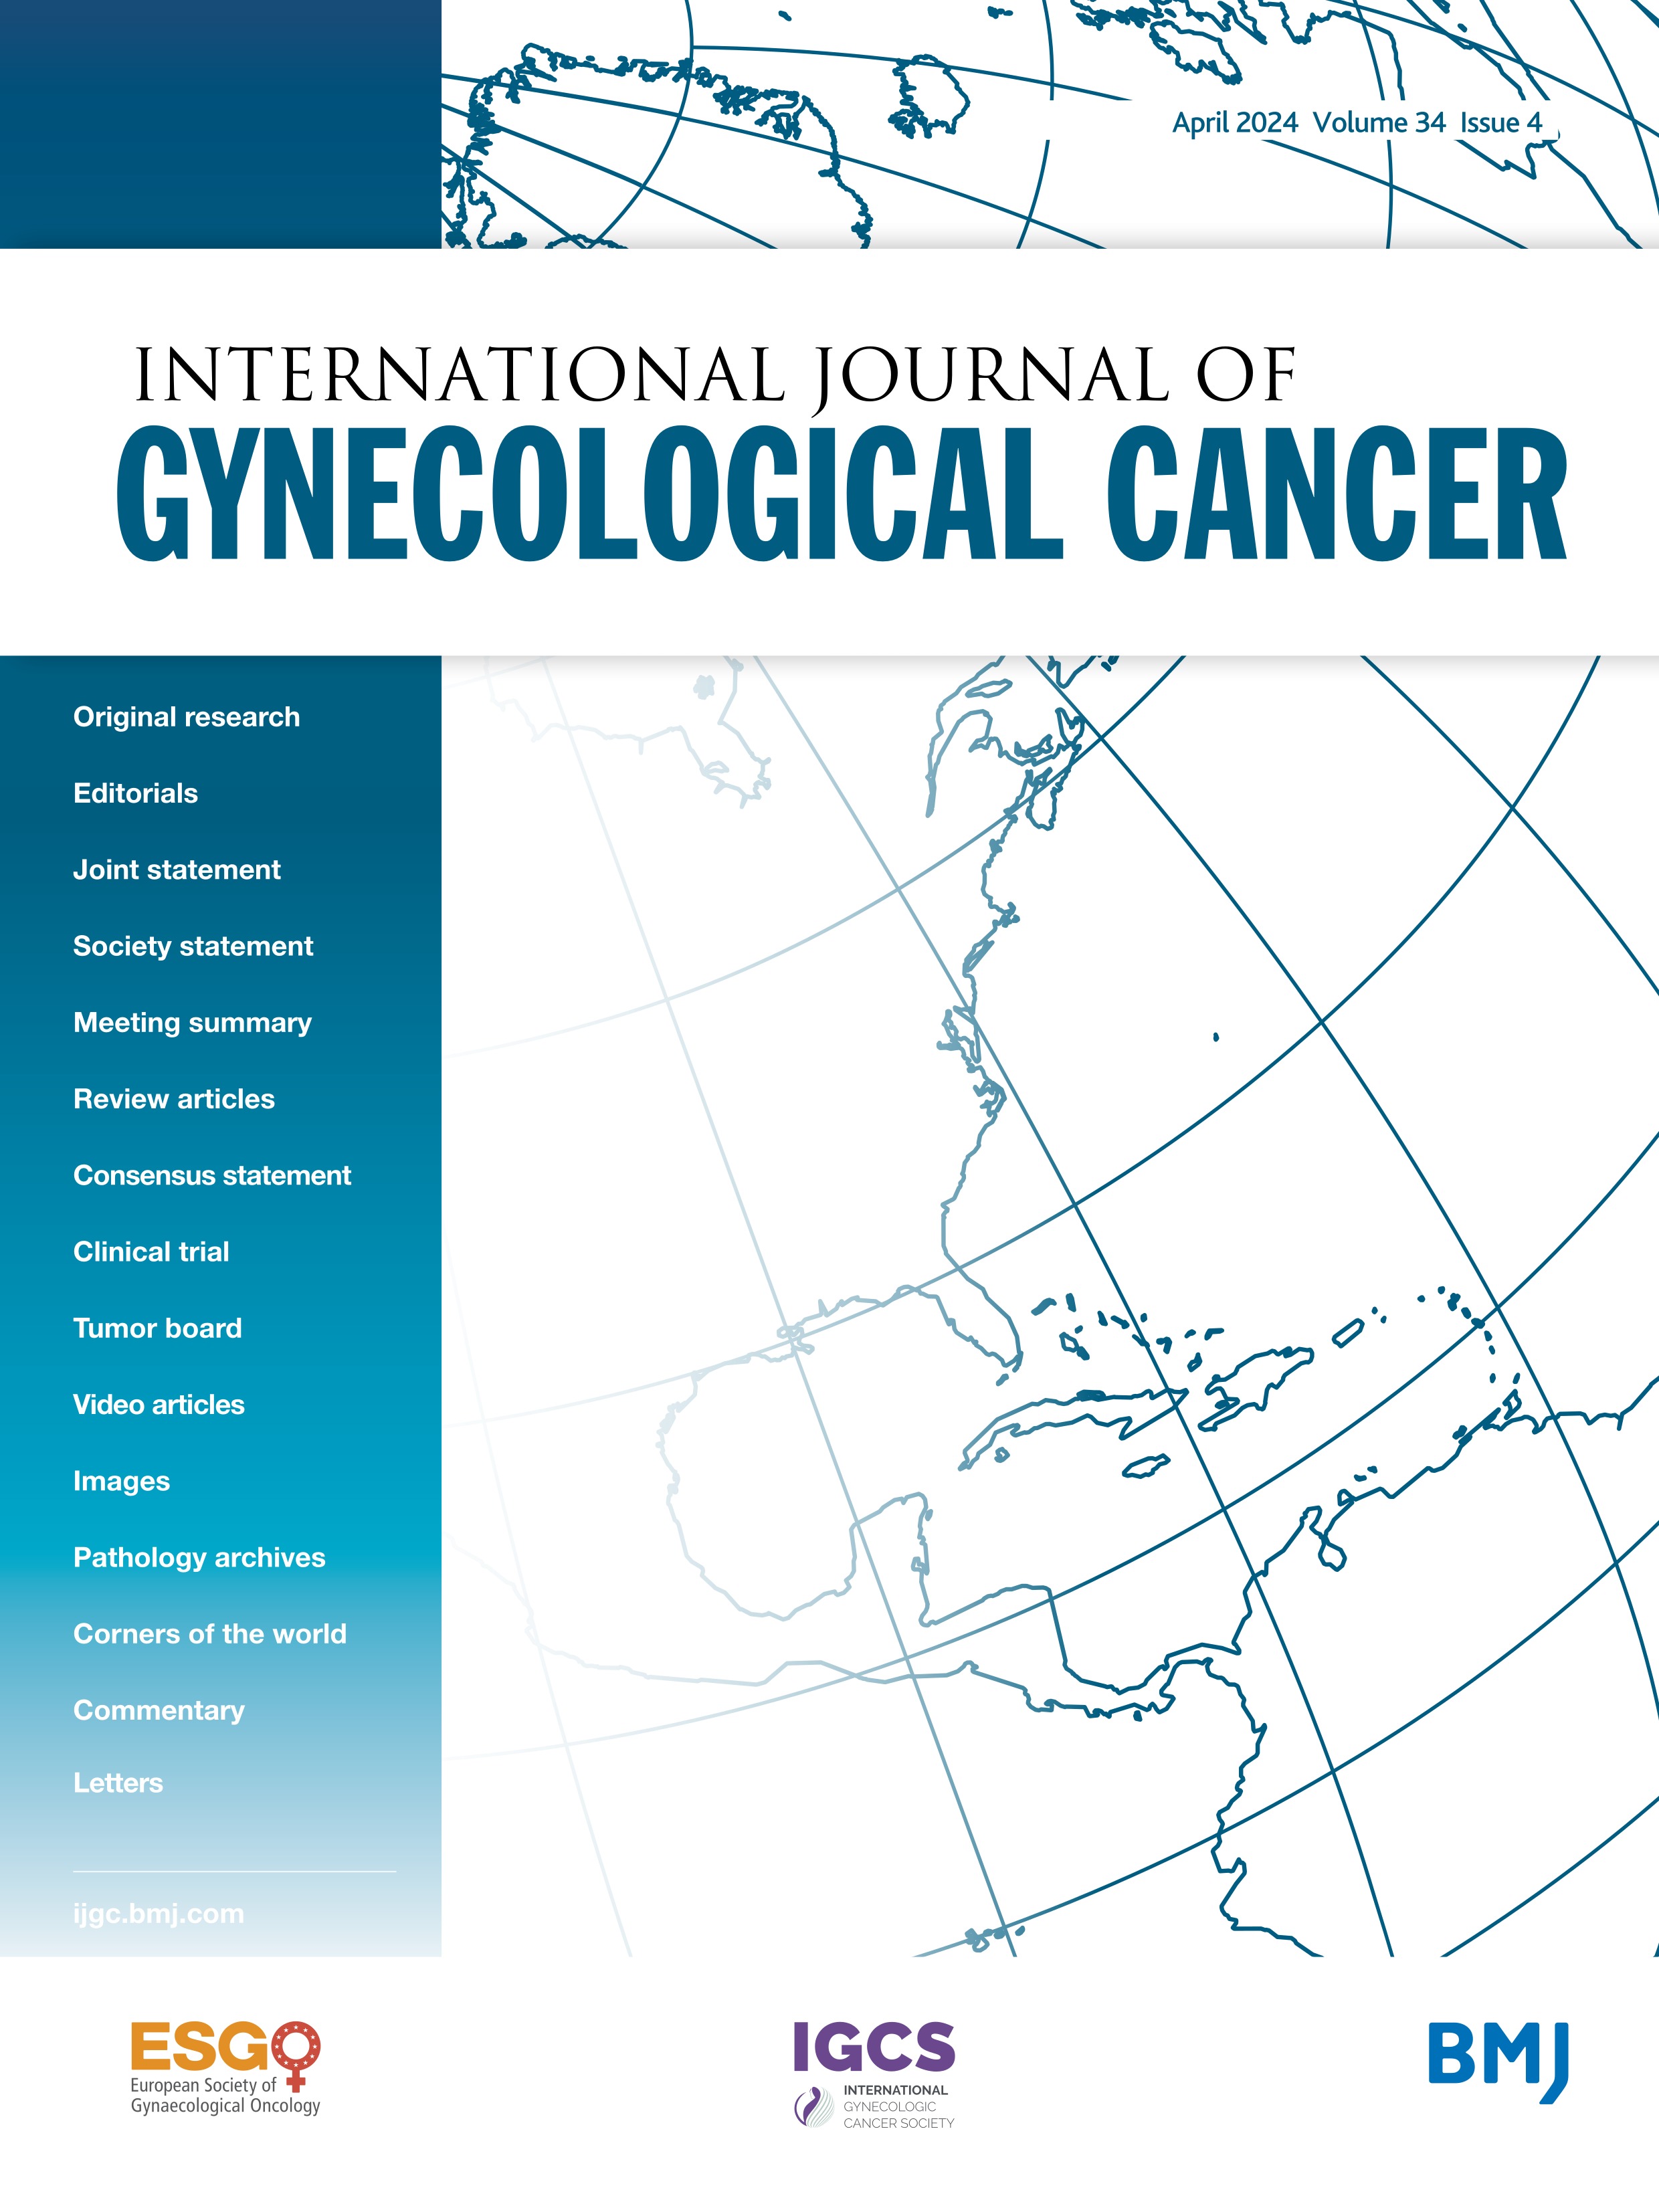 Therapeutic role of para-aortic lymphadenectomy in patients with intermediate- and high-risk endometrial cancer: a systematic review and meta-analysis